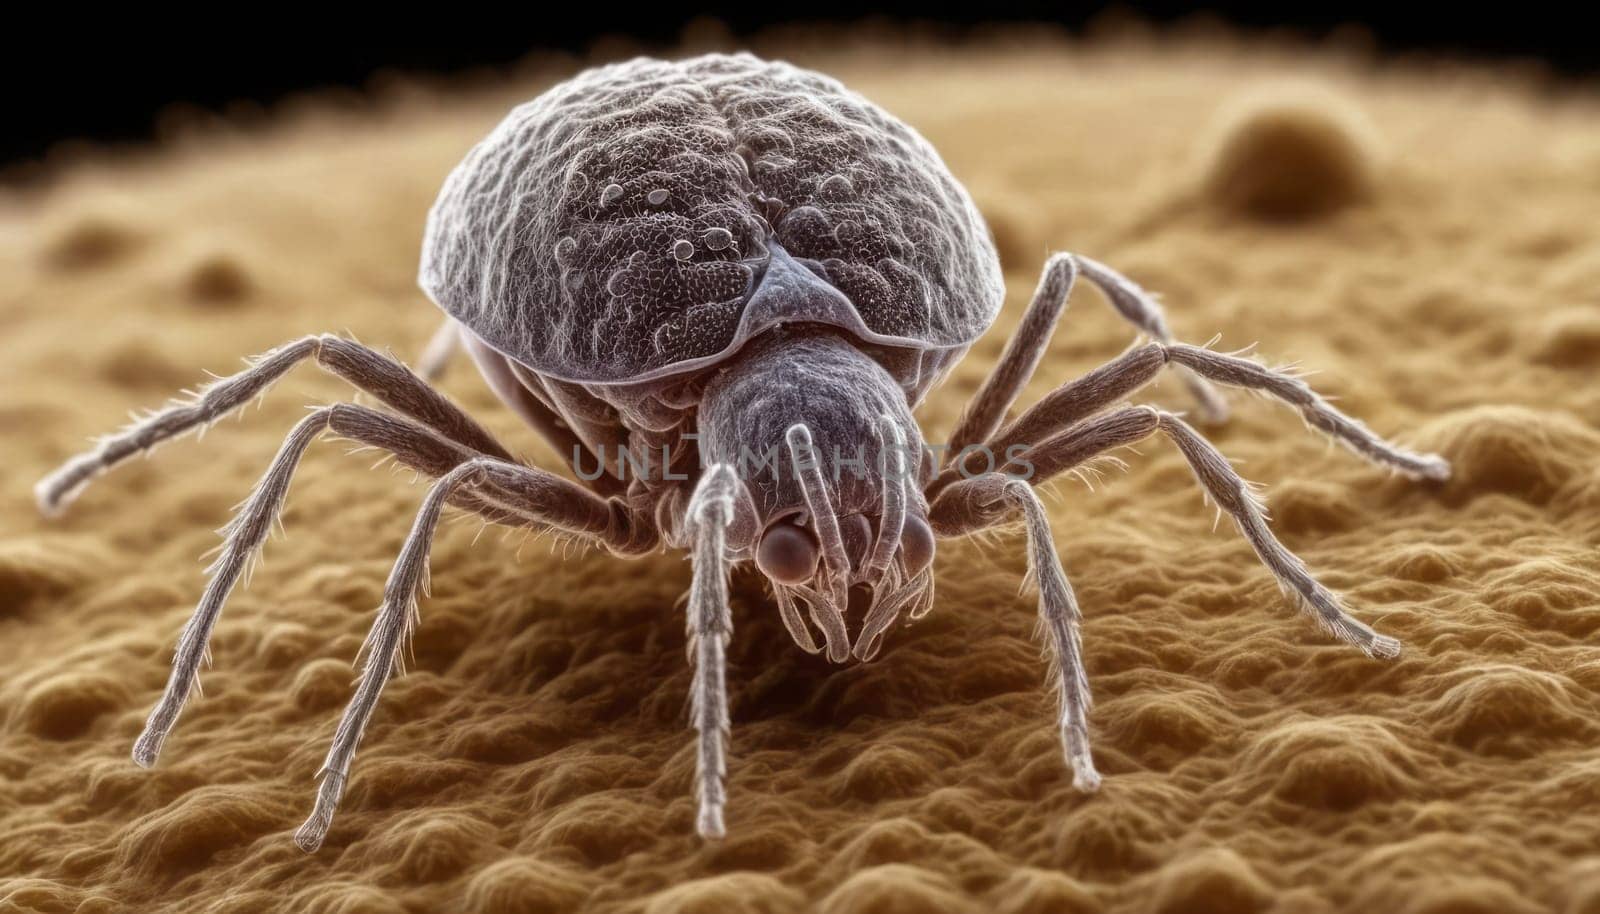 A detailed image of a dust mite, showcasing its rounded body and thin legs against a rough, irregular surface